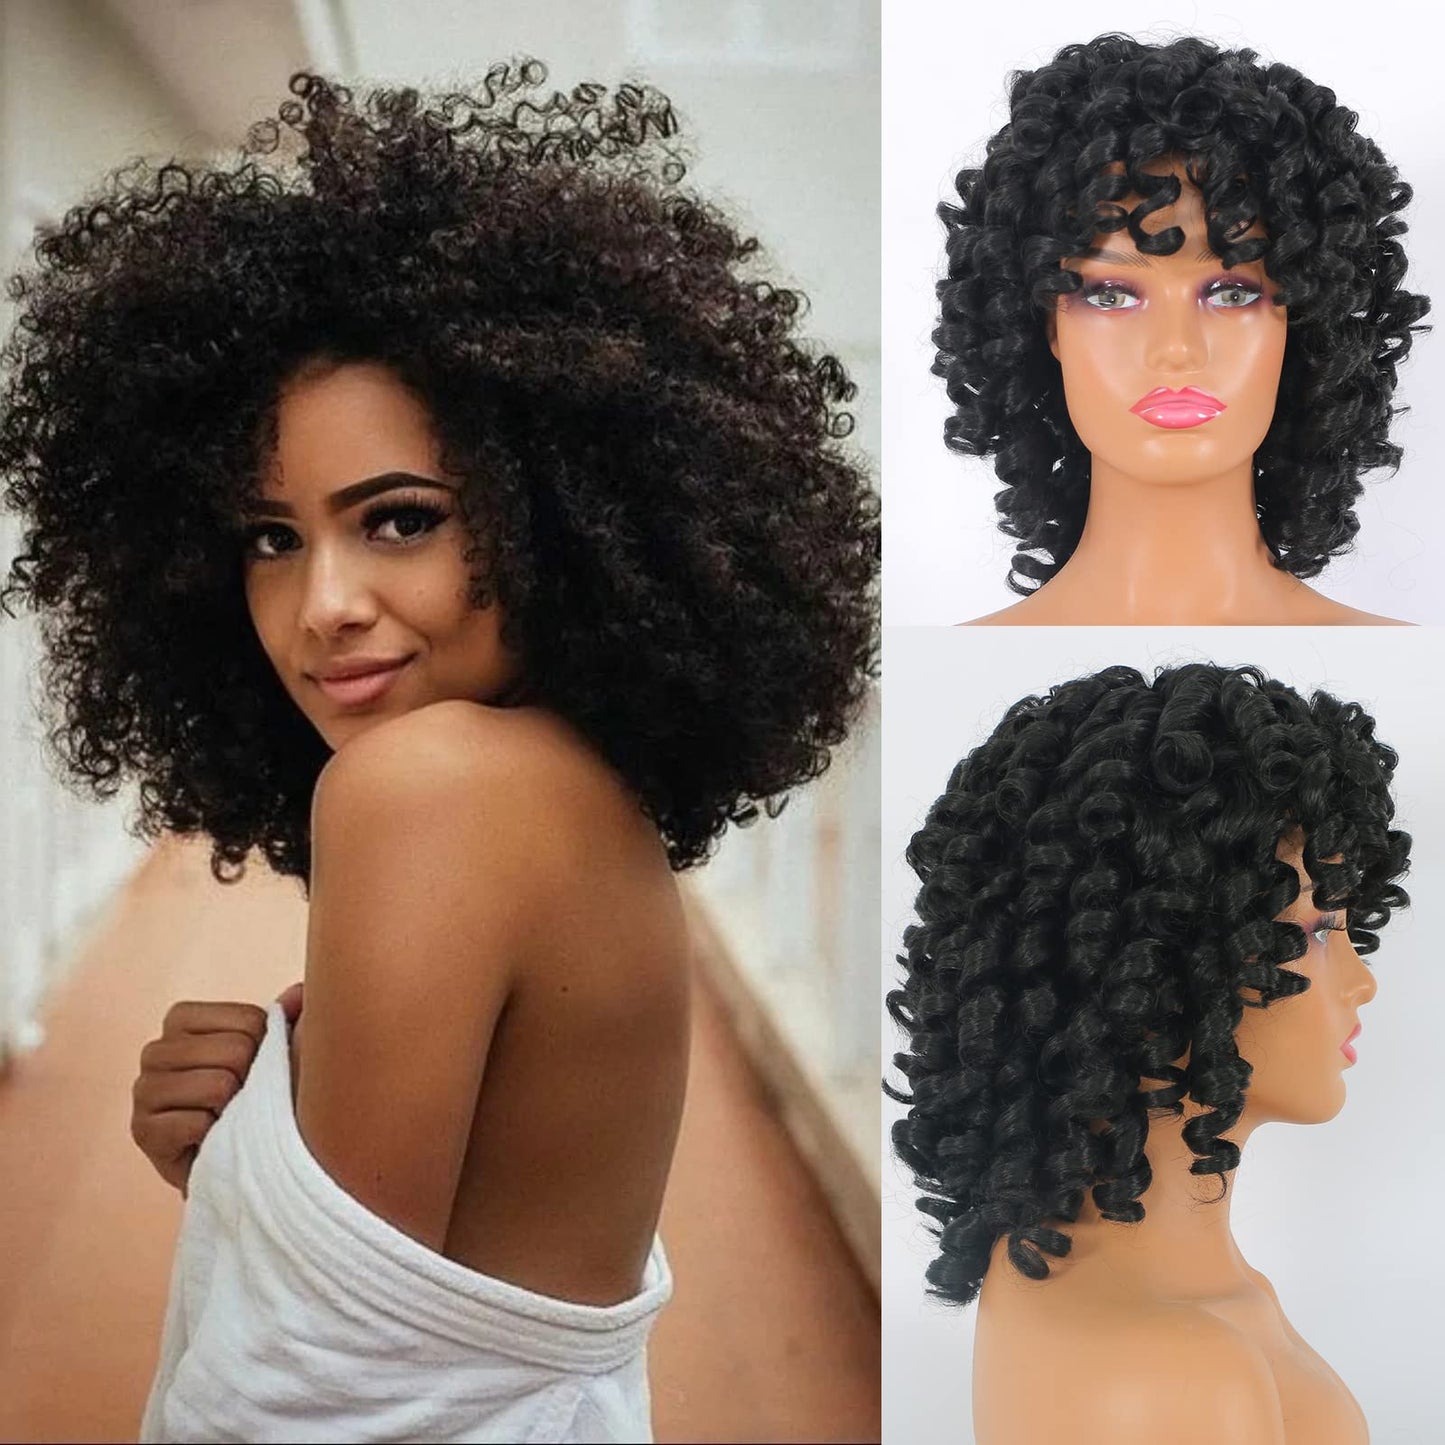 newnavat Short Curly Wigs for Black Women Soft Black Big Curly Wig with Bangs Afro Kinky Curls Heat Resistant Natural Looking Synthetic Wig for African American Women (Big Curly)